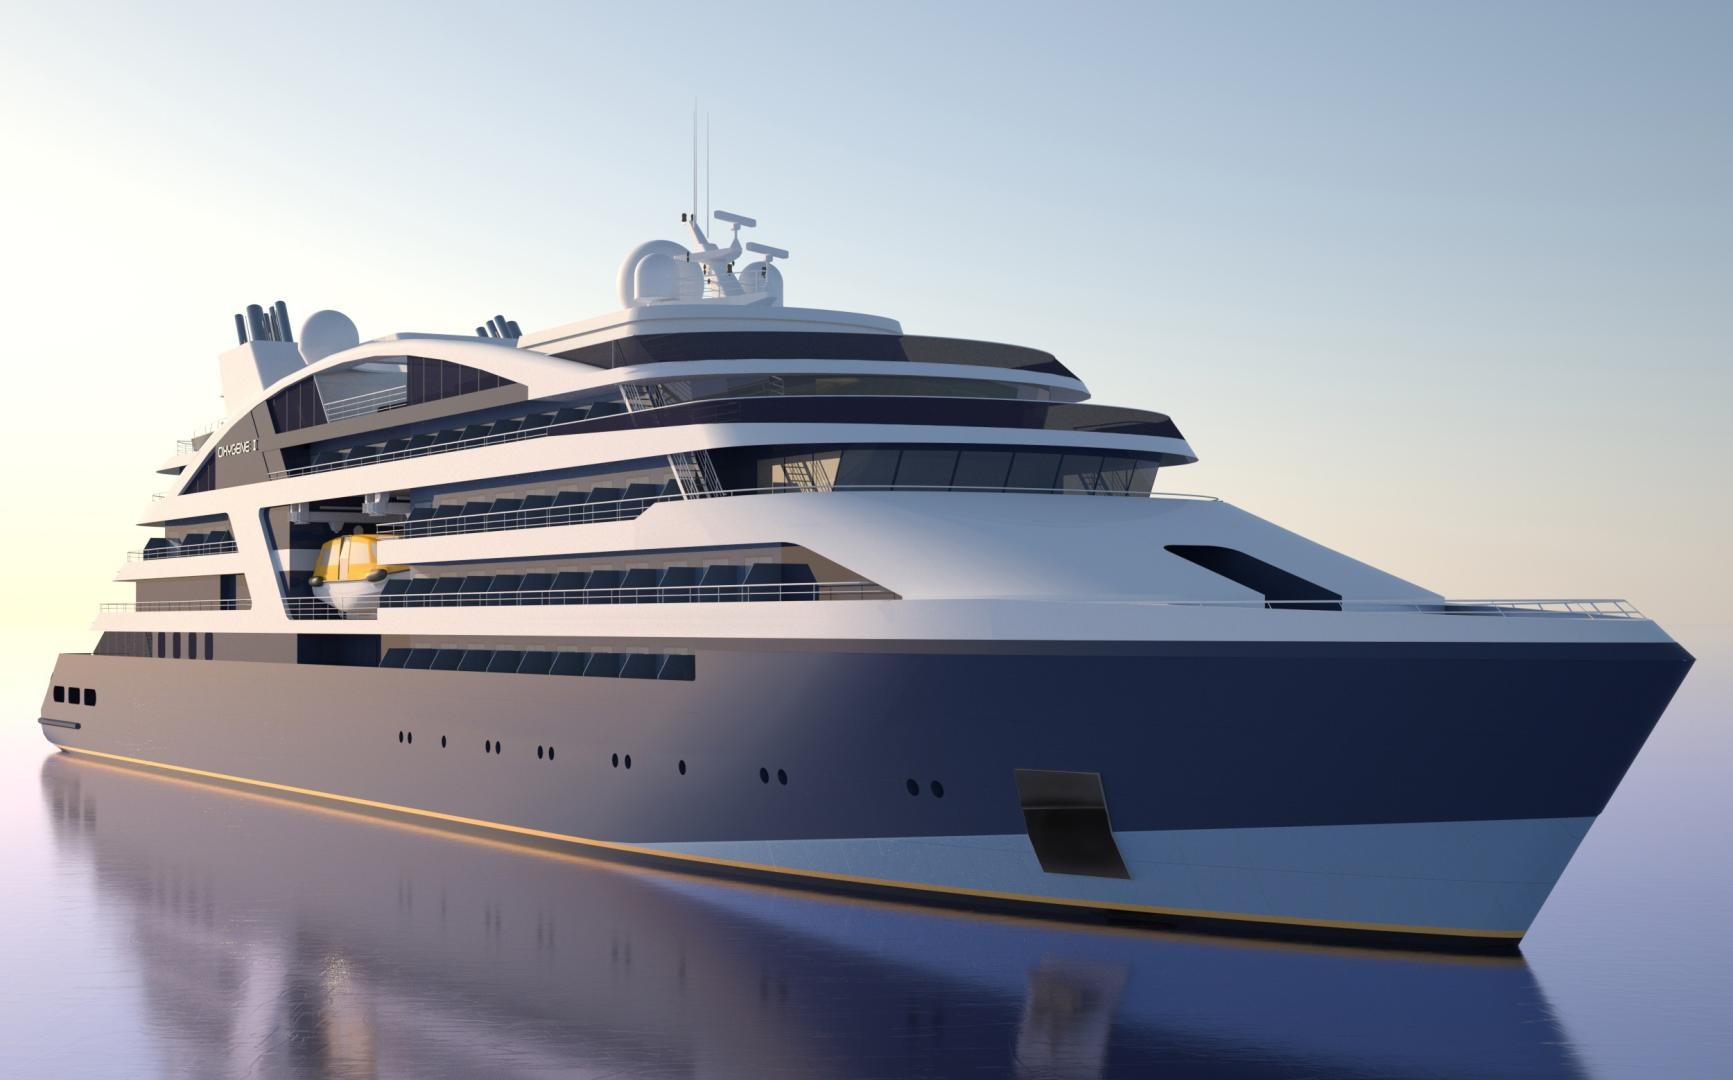 Fincantieri, Vard will build 2 further cruise vessels for Ponant